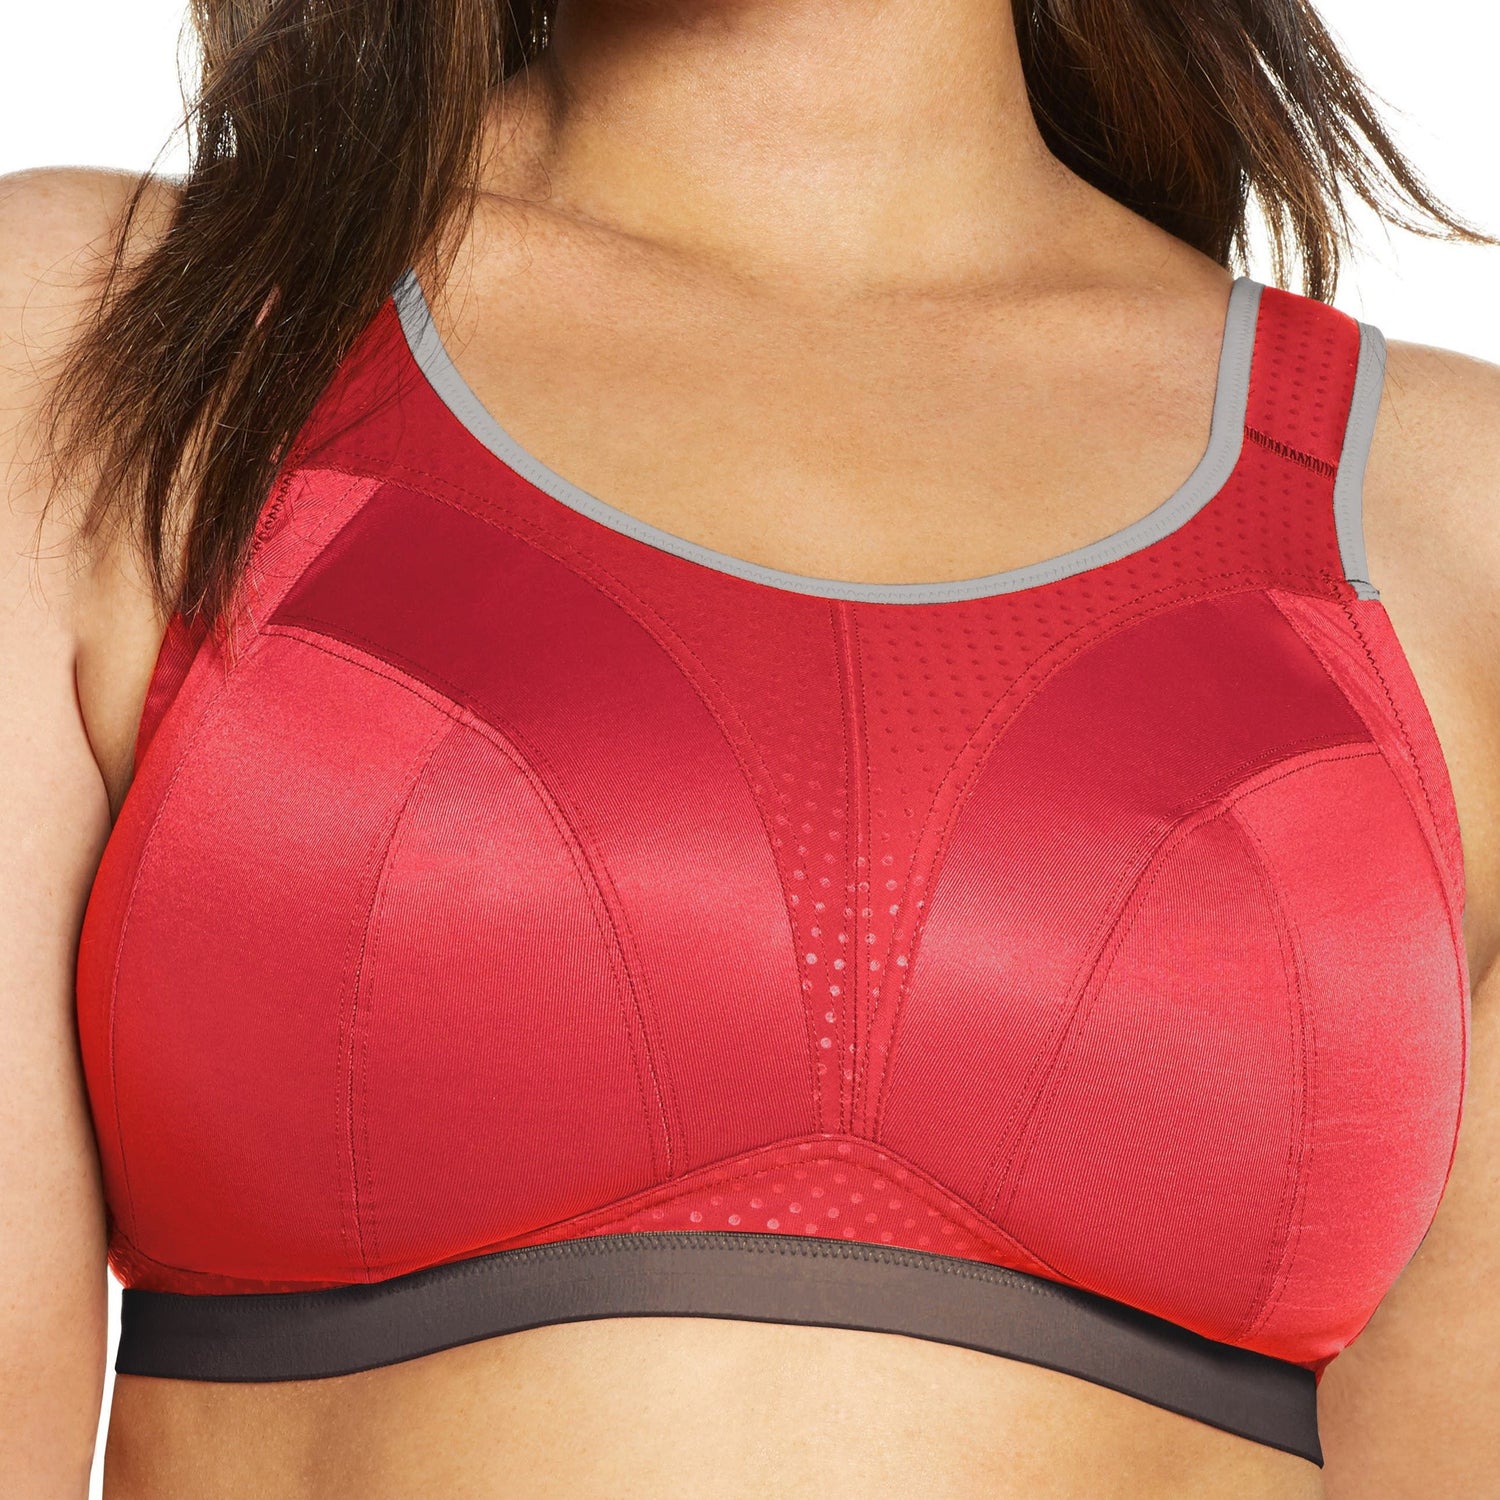 FREYA ACTIVE SOFT CUP SPORTS BRA 4391 IN RED COLOR!!! (N87)